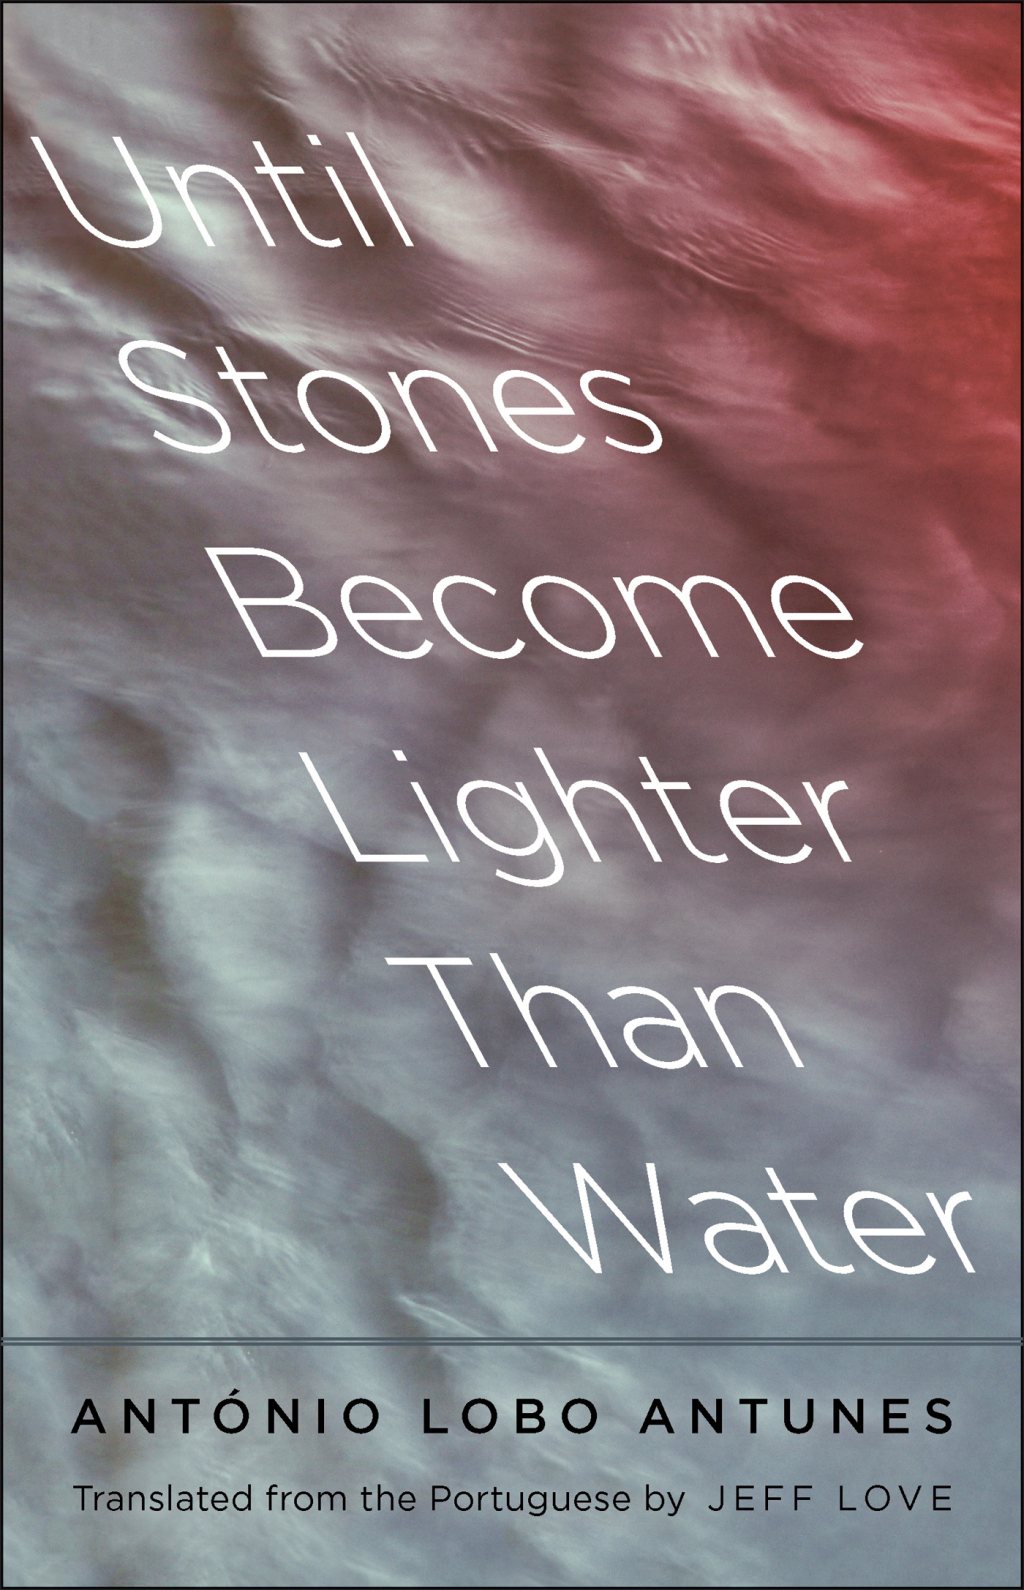 Reflowable Until Stones Become Lighter Than Water